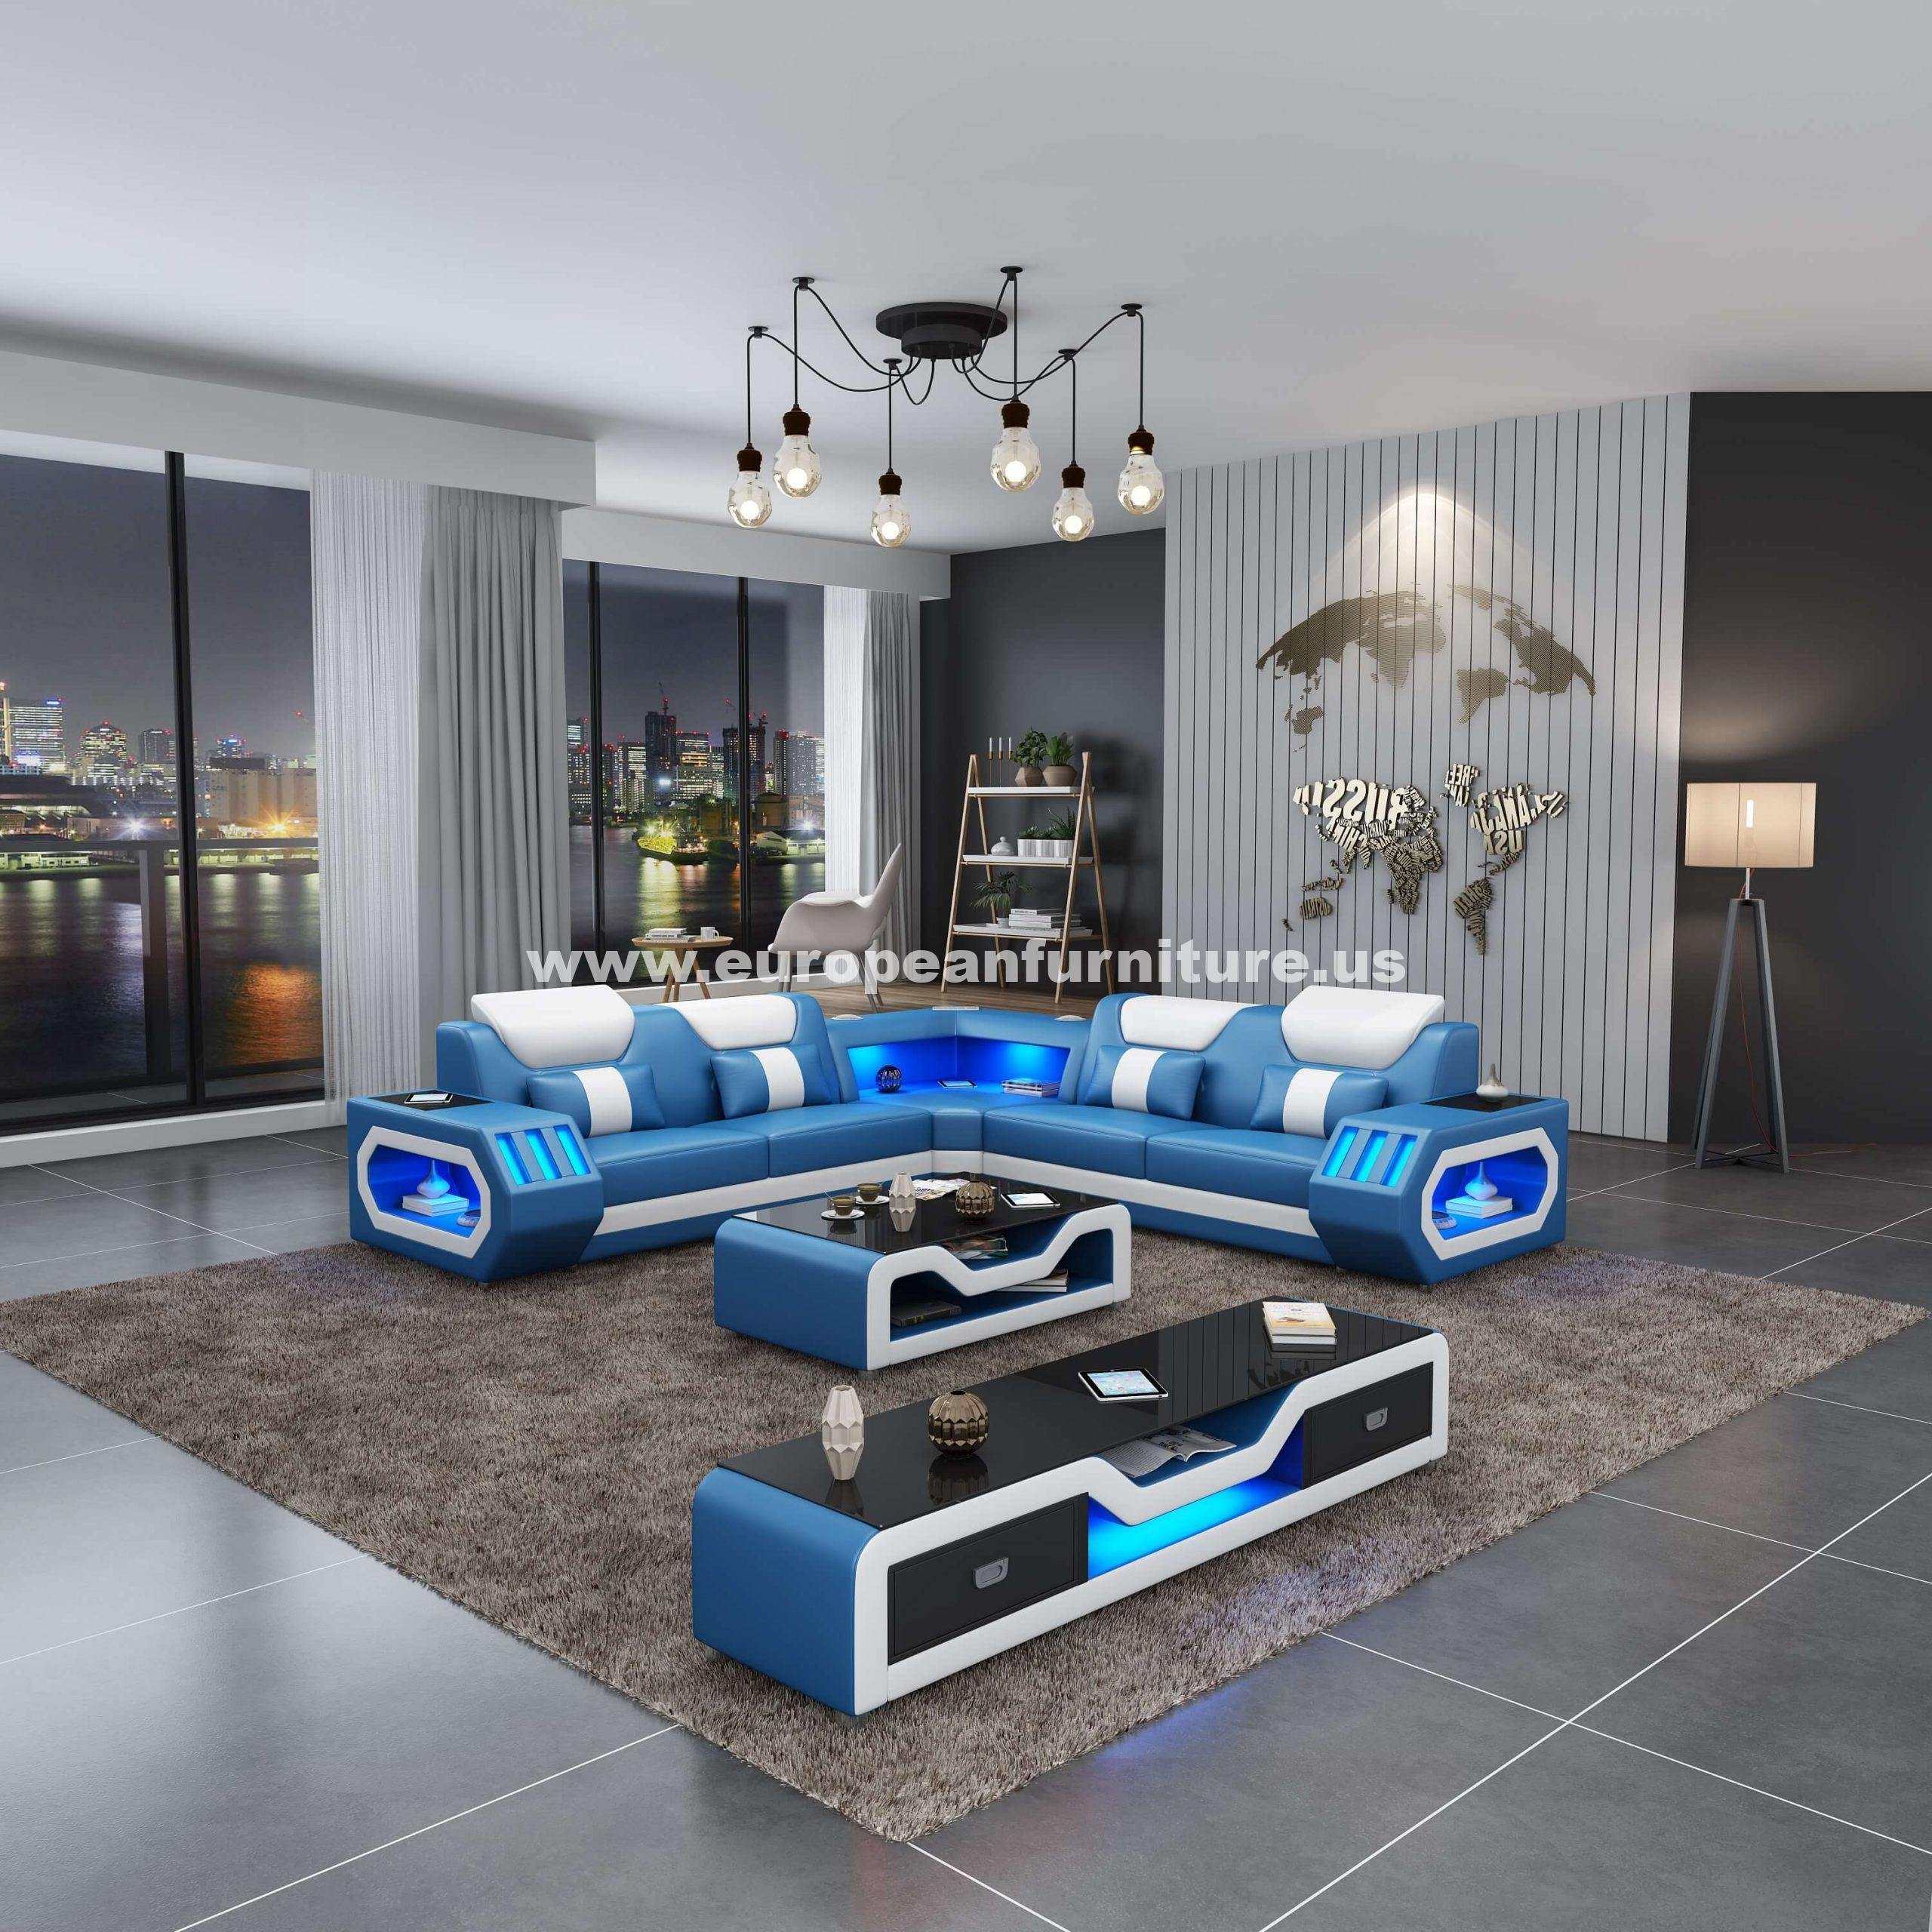 Contemporary, Modern Sectional Sofa SPACESHIP LED-86662-BLUW in White, Blue Italian Leather